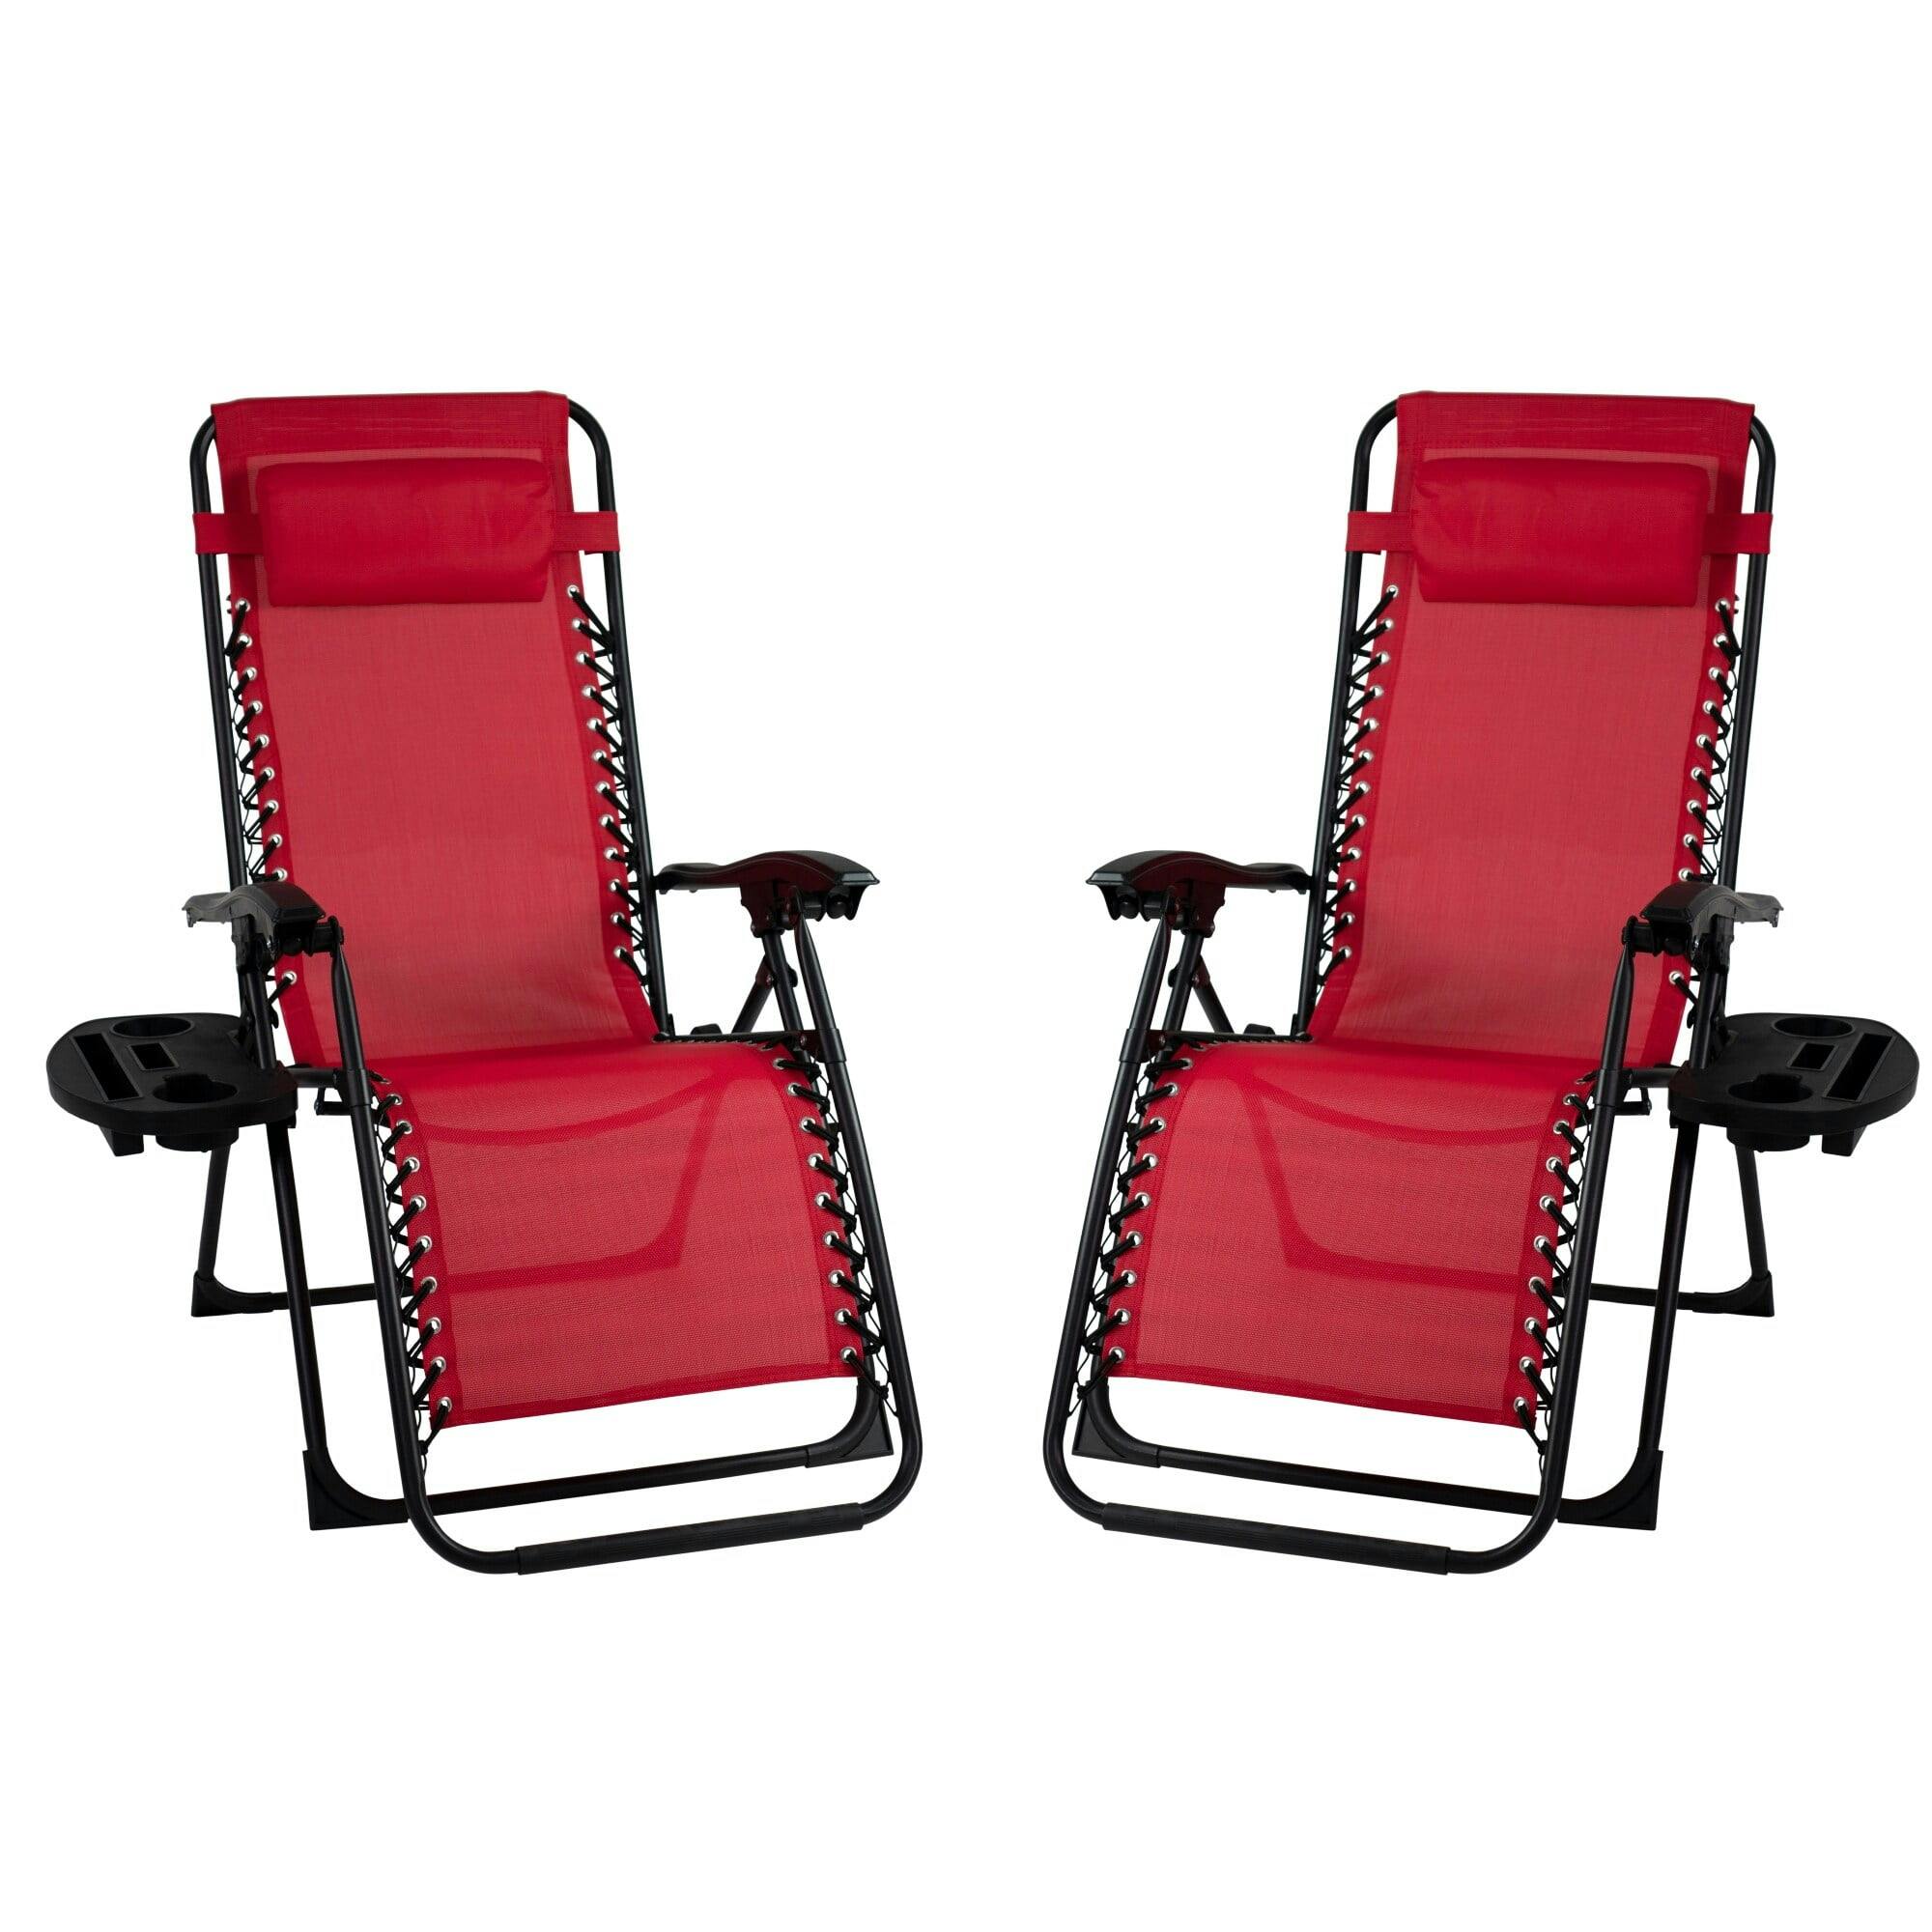 Deluxe Black Steel Frame Zero Gravity Lounger with Red Fabric